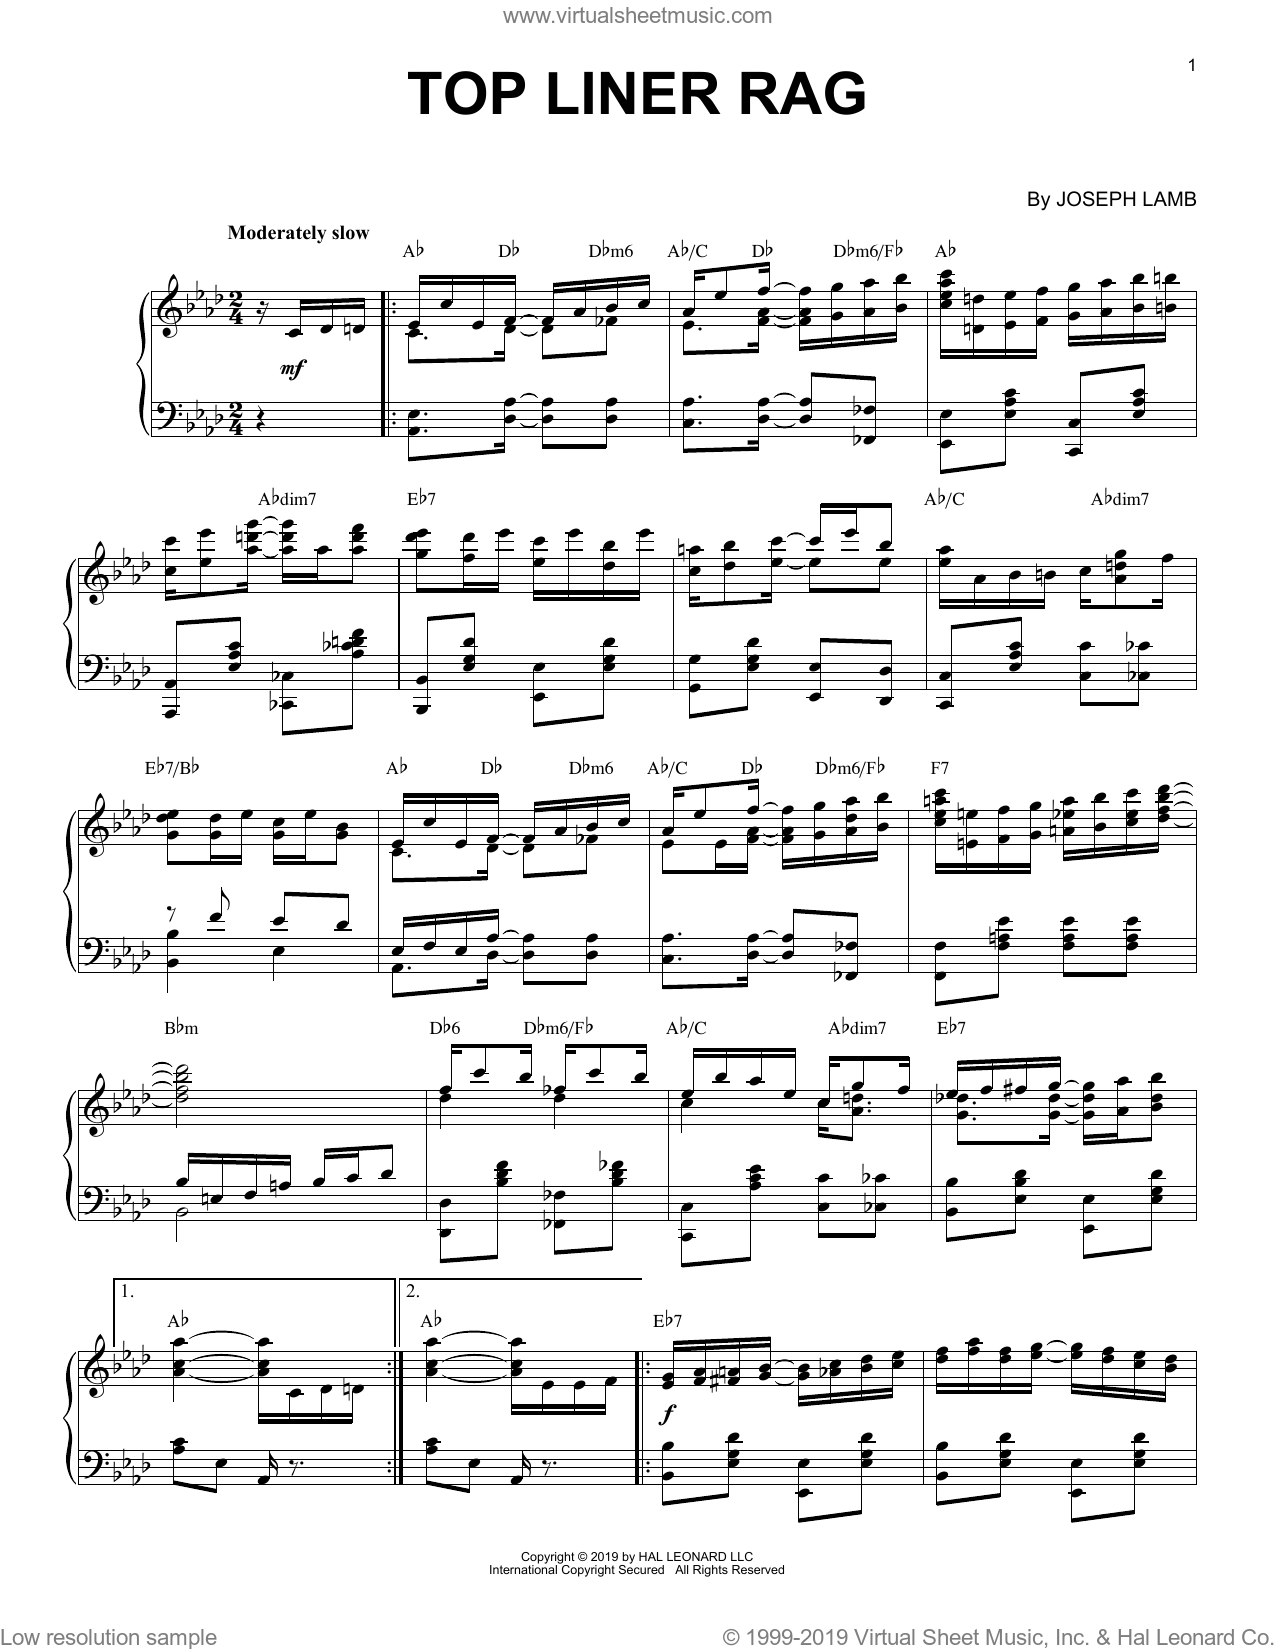 Black and White Rag Sheet music for Piano (Solo)